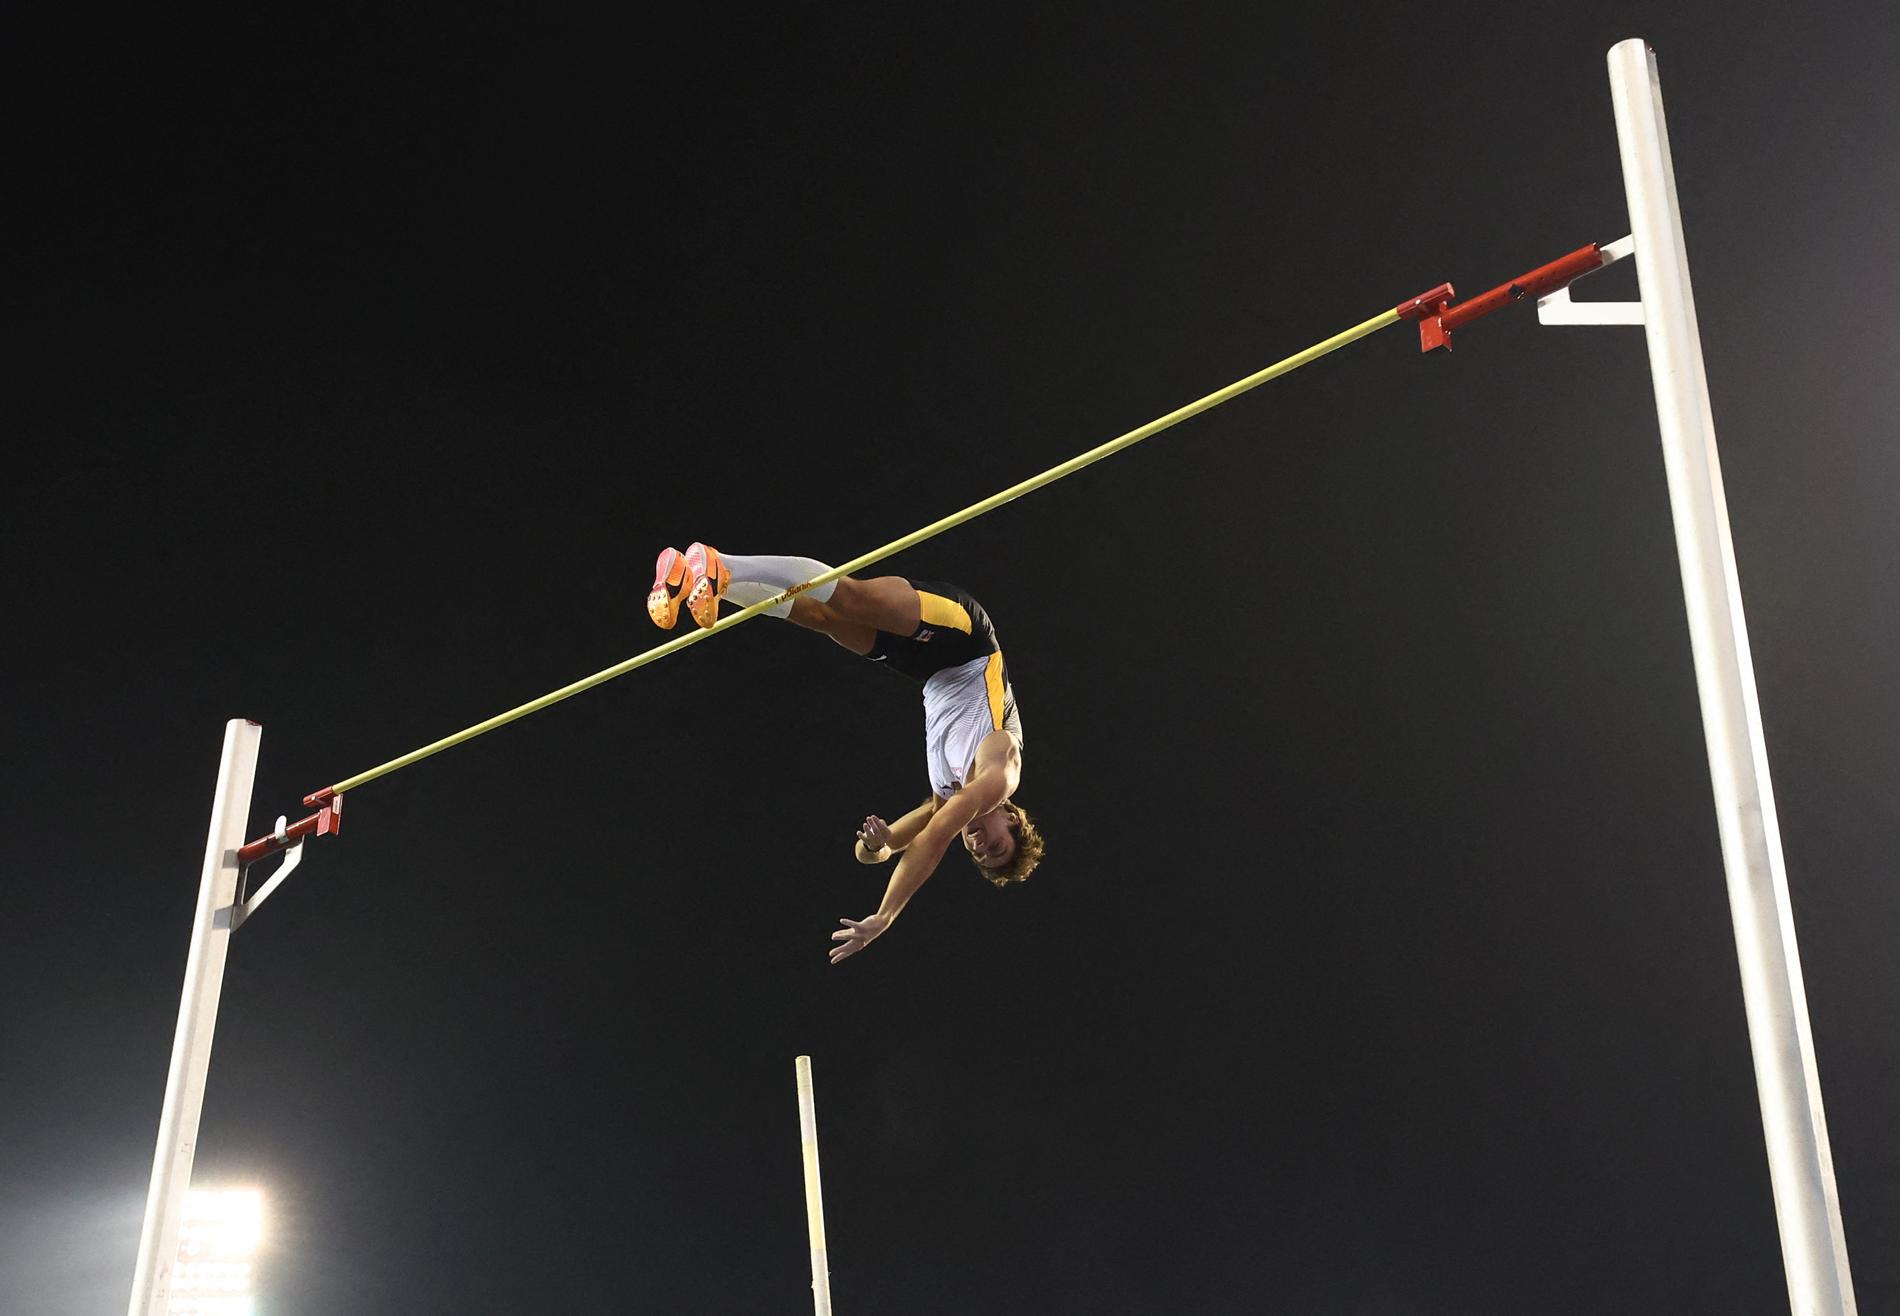 New world record in pole vault for Armand Duplantis: he jumped 6.23 metres